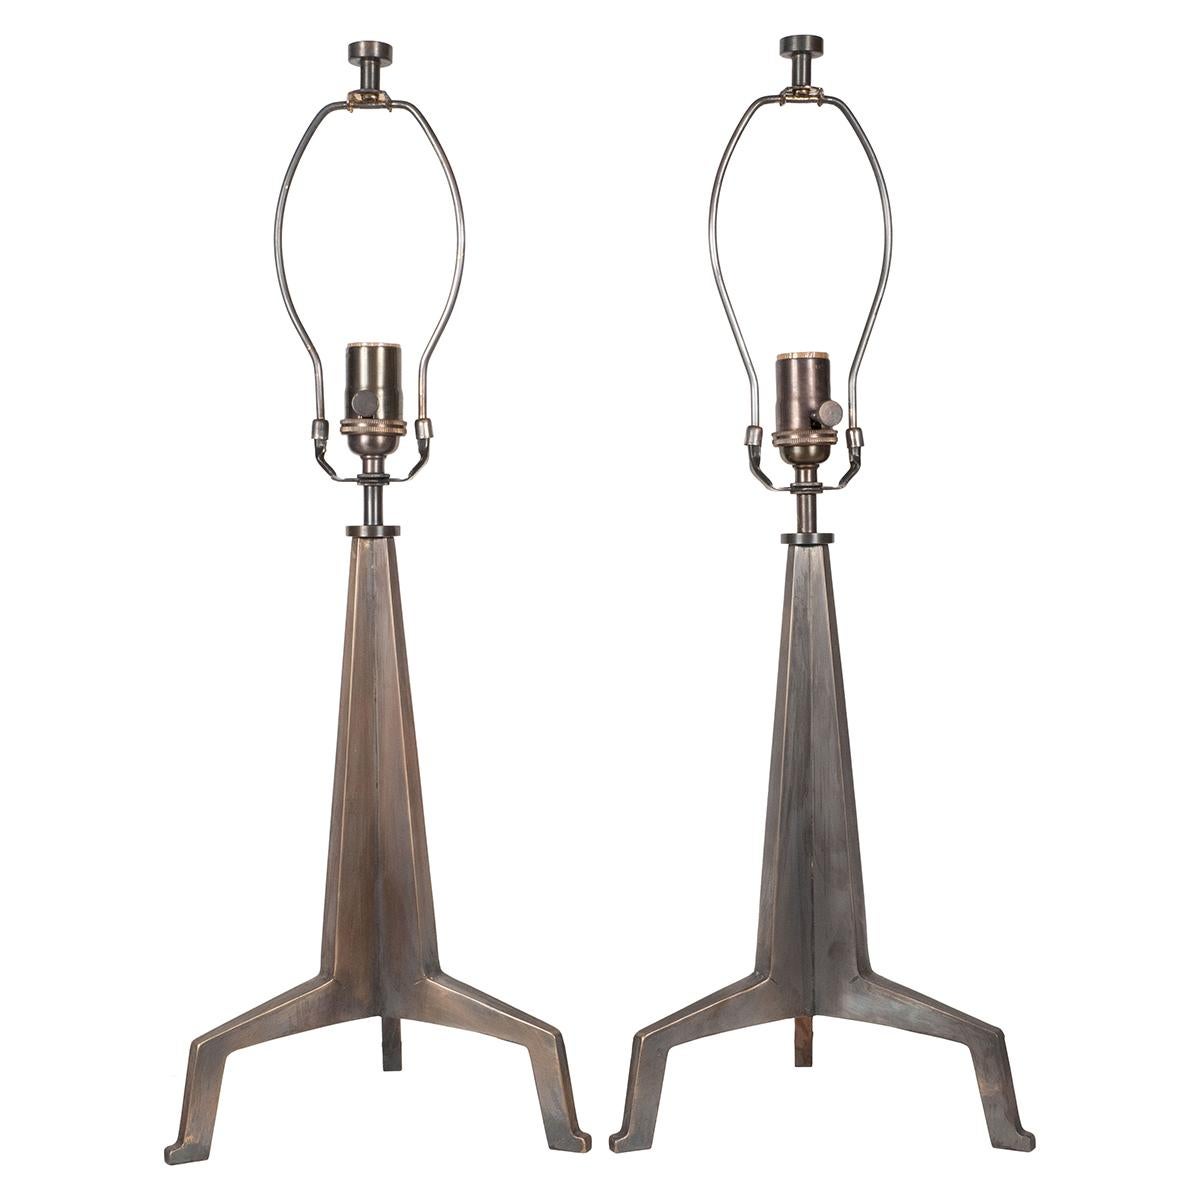 Pair of antiqued brass, brutalist style tripod lamps by Marcelo Bessa for Spark Interior in the style of Giacometti.